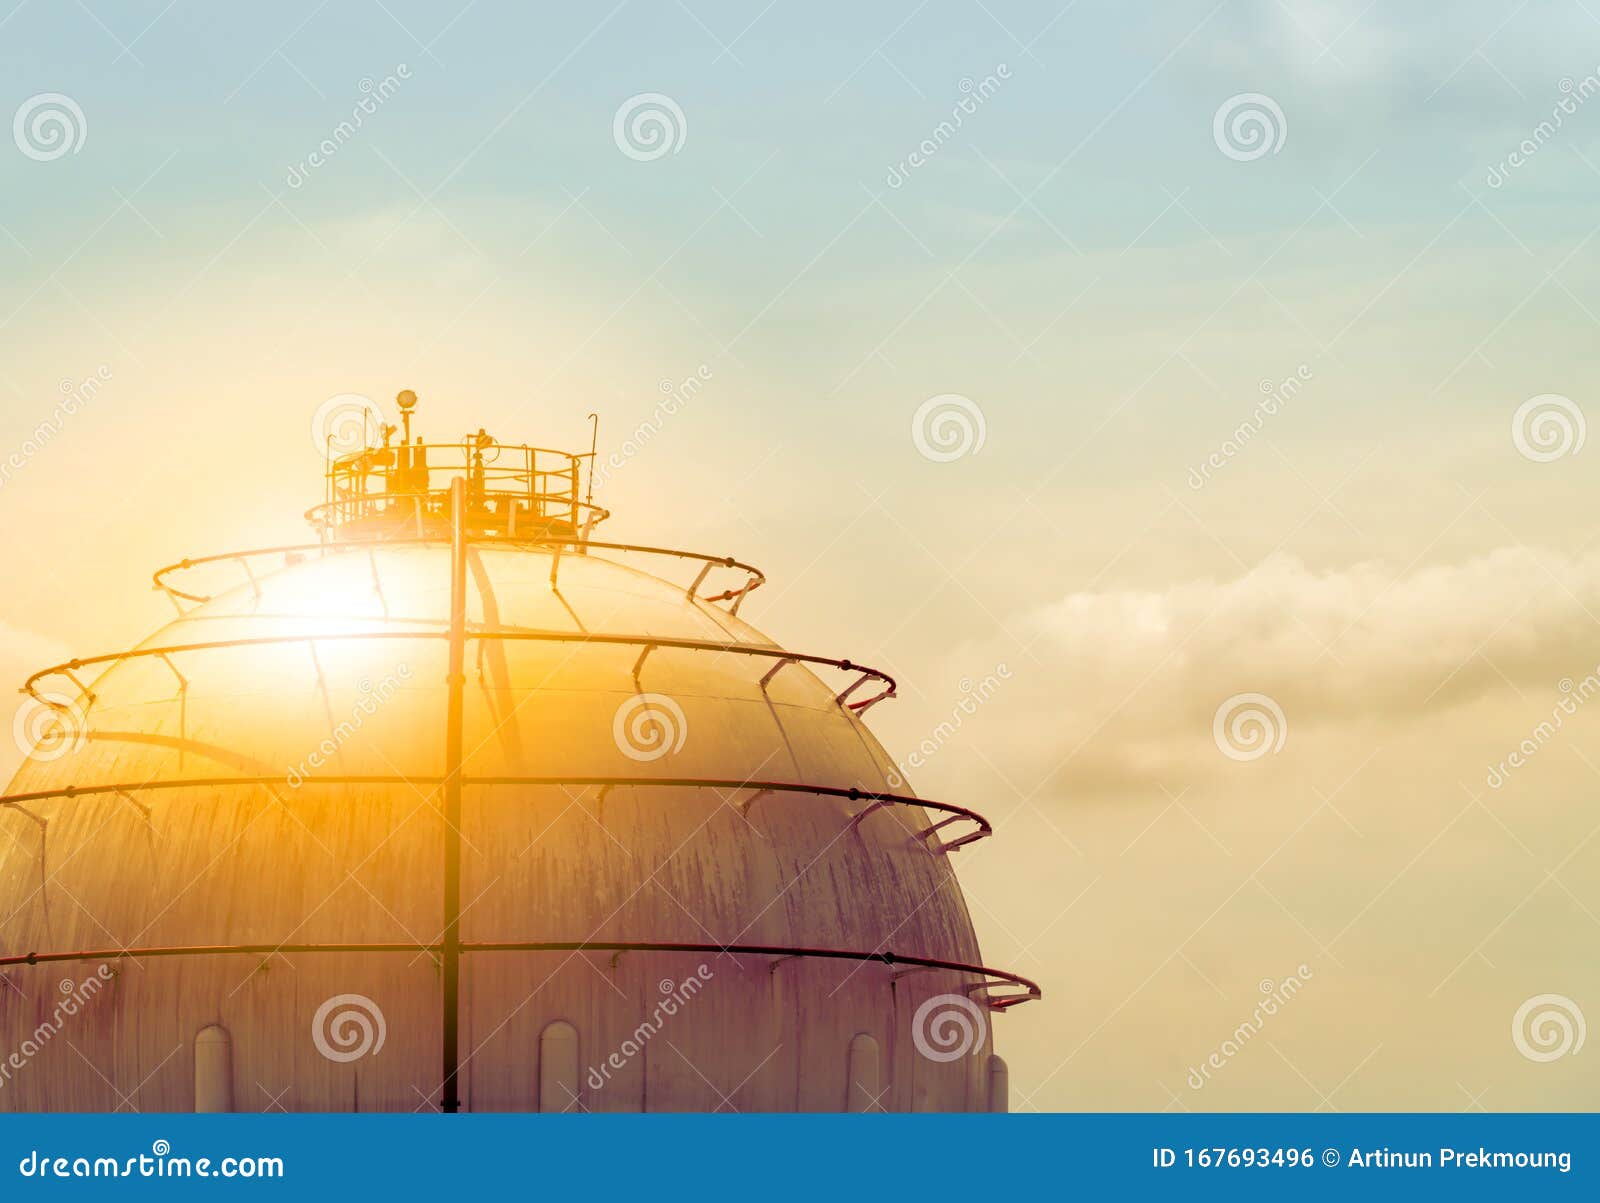 industrial gas storage tank. lng or liquefied natural gas storage tank. spherical gas tank in petroleum refinery. above-ground